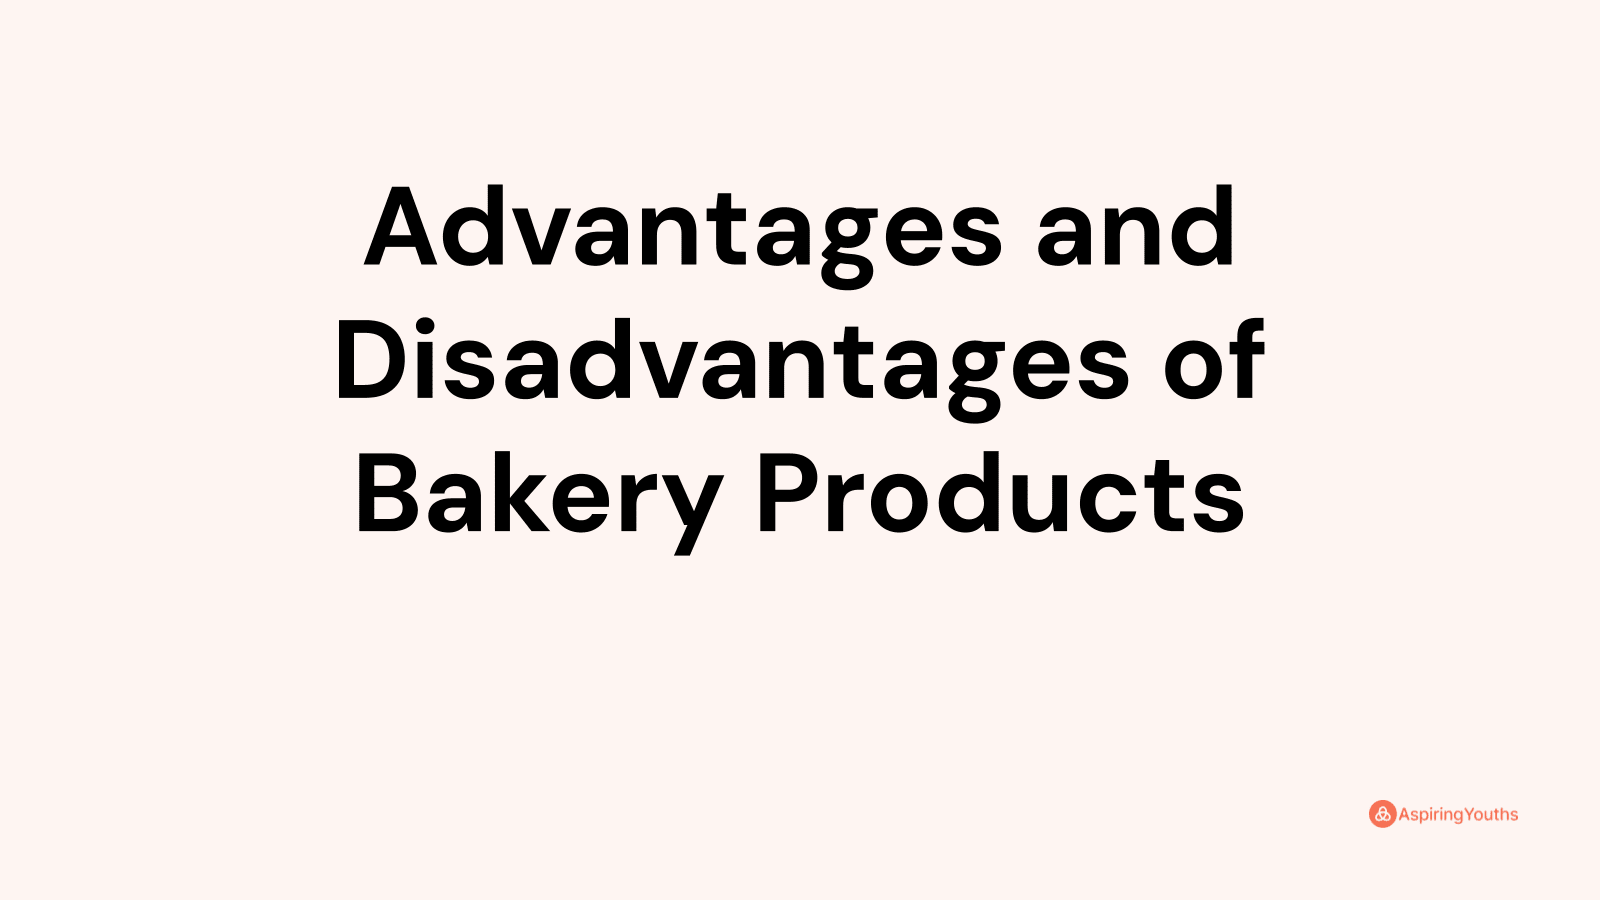 Advantages and disadvantages of Bakery Products